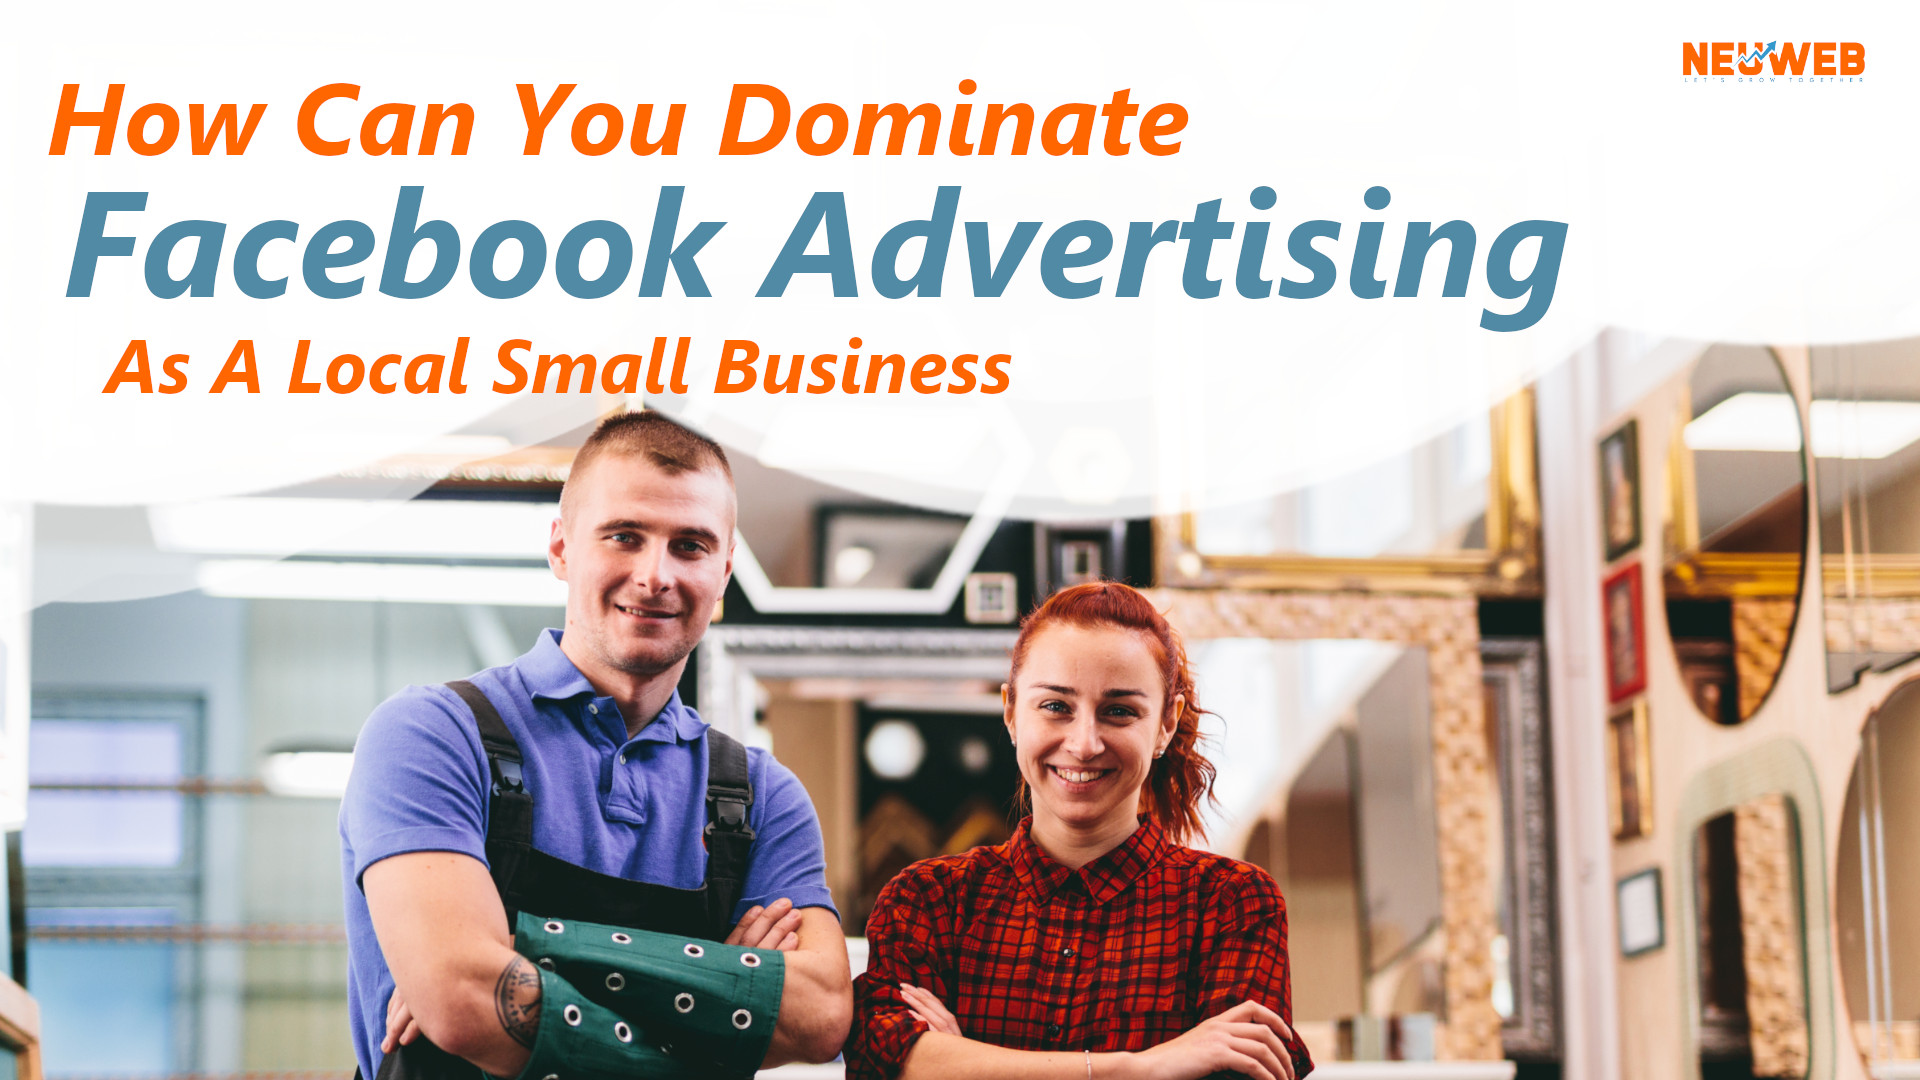 How Can Facebook Advertising Help Your Local Small Business